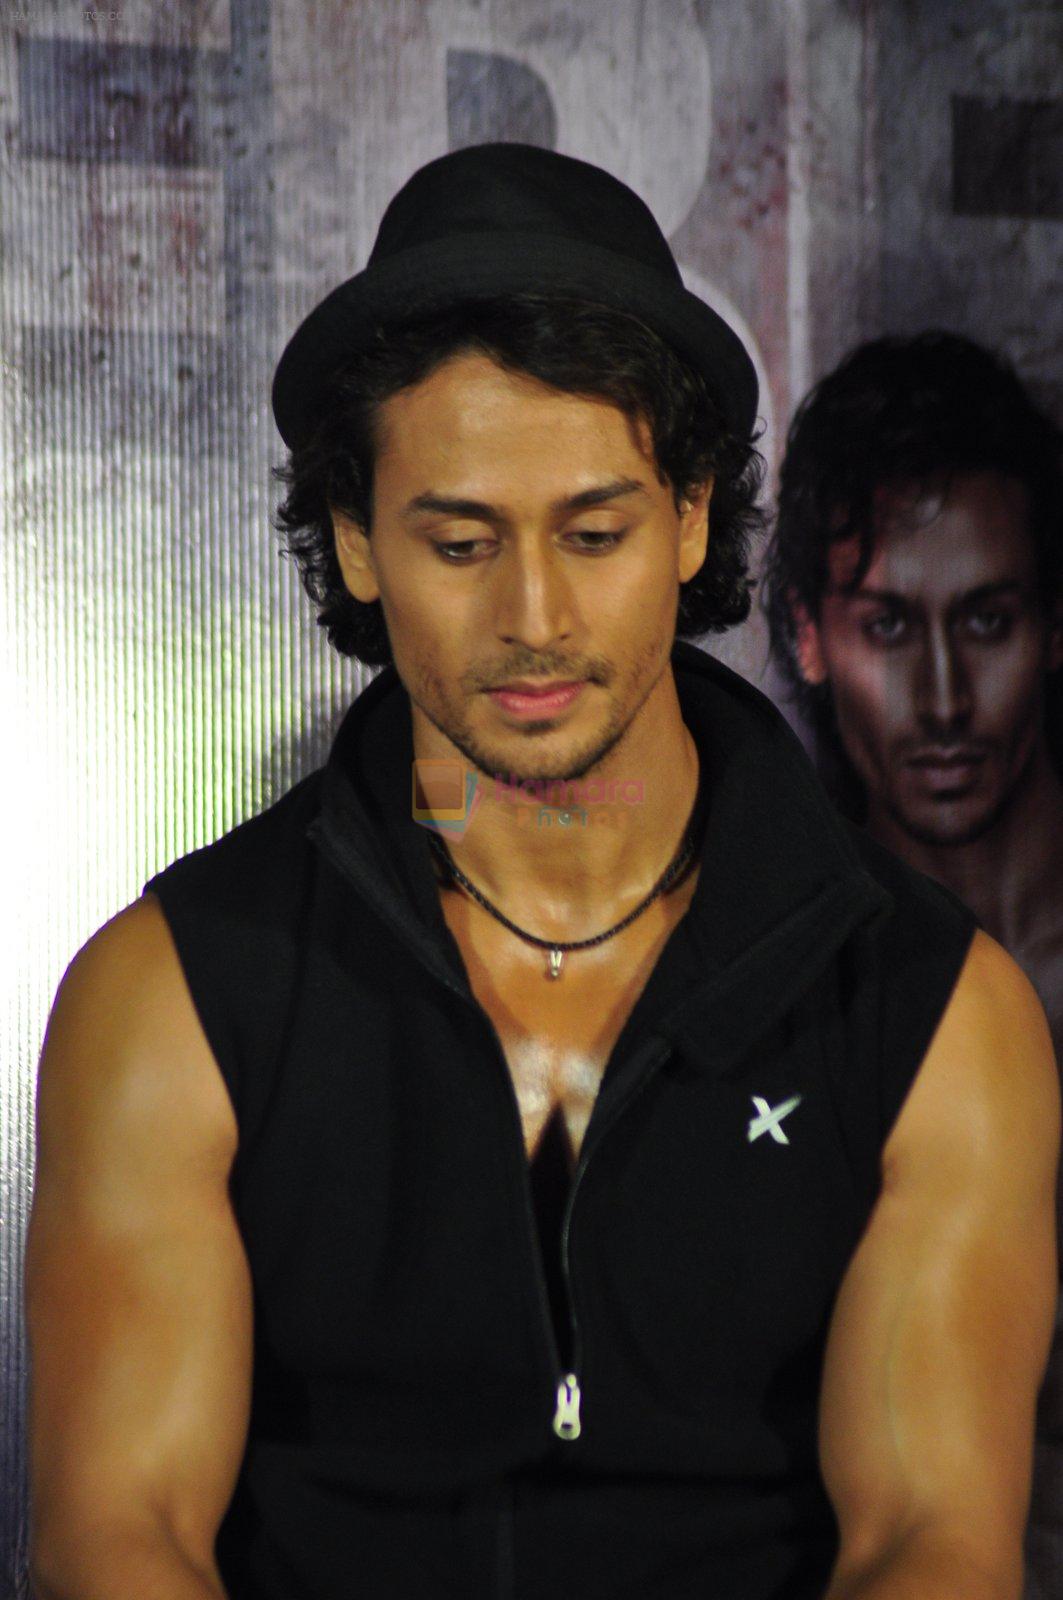 Tiger Shroff at Baaghi film promotions on 13th April 2016